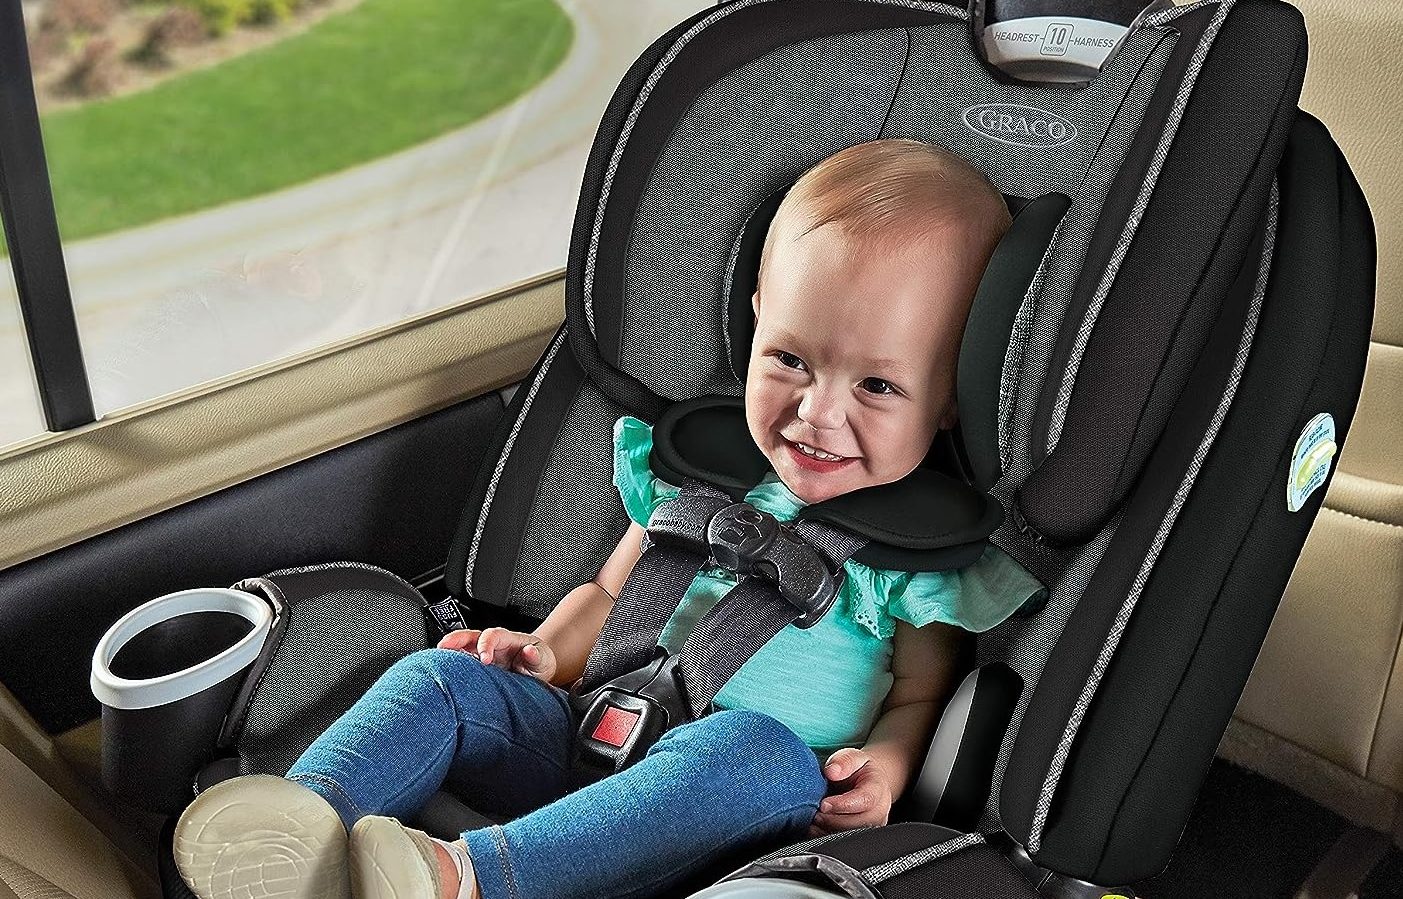 Graco Car Seat Lasts Ten Years, $82 off for Black Friday